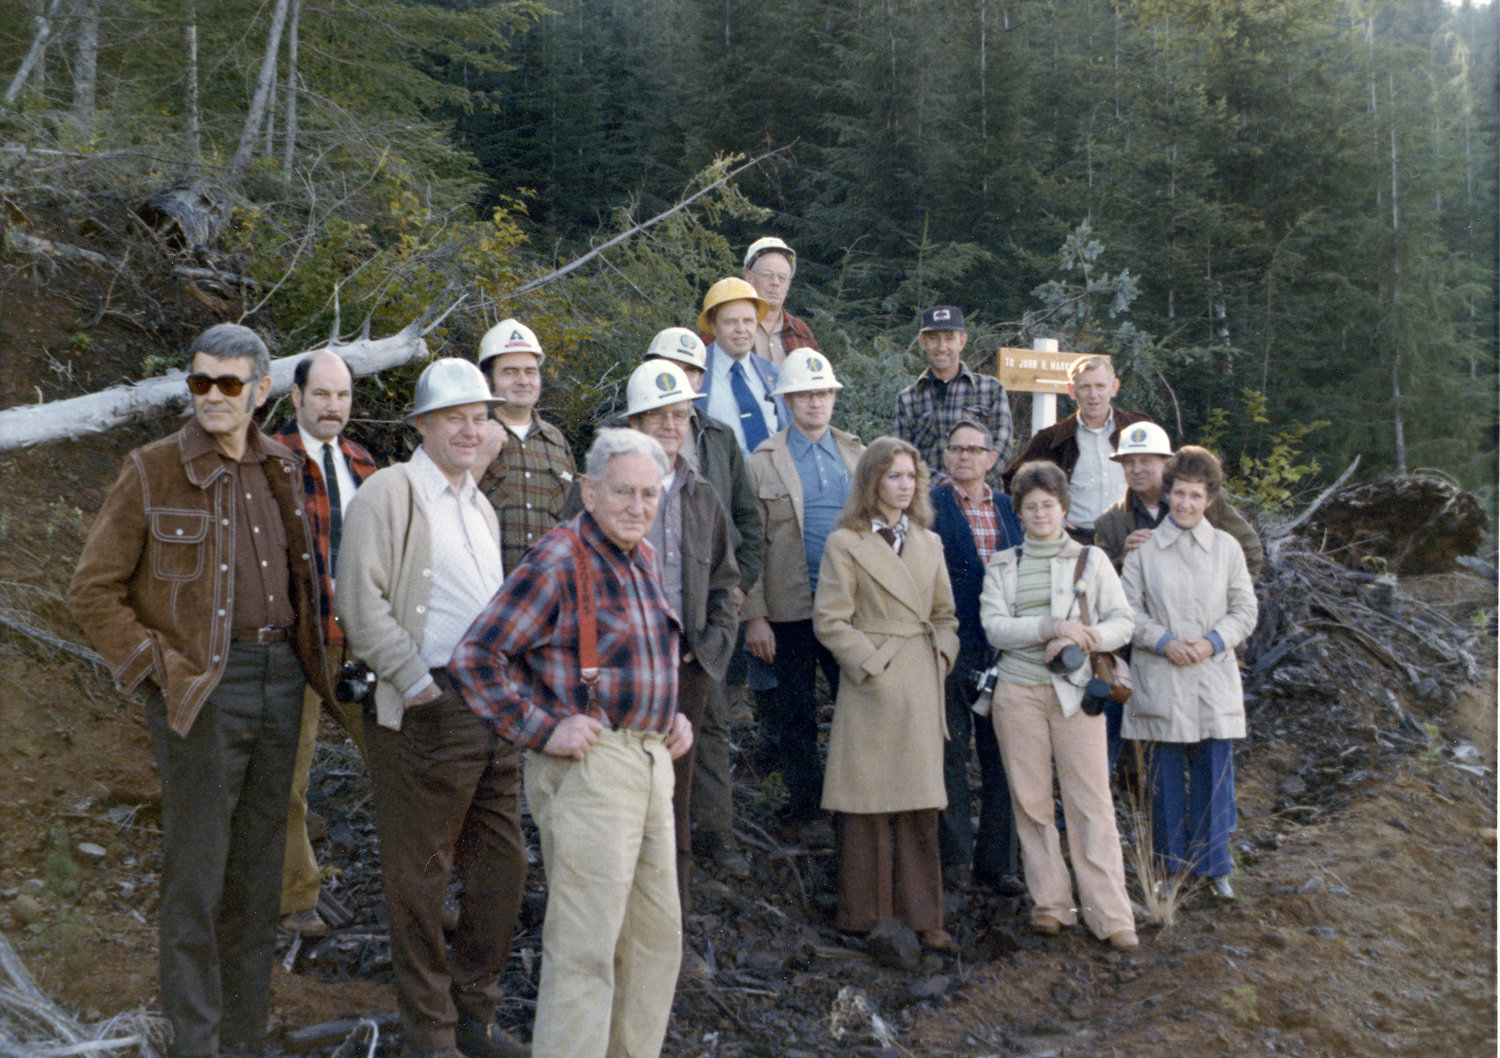 In 1976, at far left is Howard Hopkins of the DNR with John Alexander in back next to him. At front is John Markham. Also shown are Merle Stratton of the DNR, Jim Church of Weyerhaeuser, Bud Clark of the DNR, and Paul Hayes in the cap standing next to the John Markham Tree sign.   